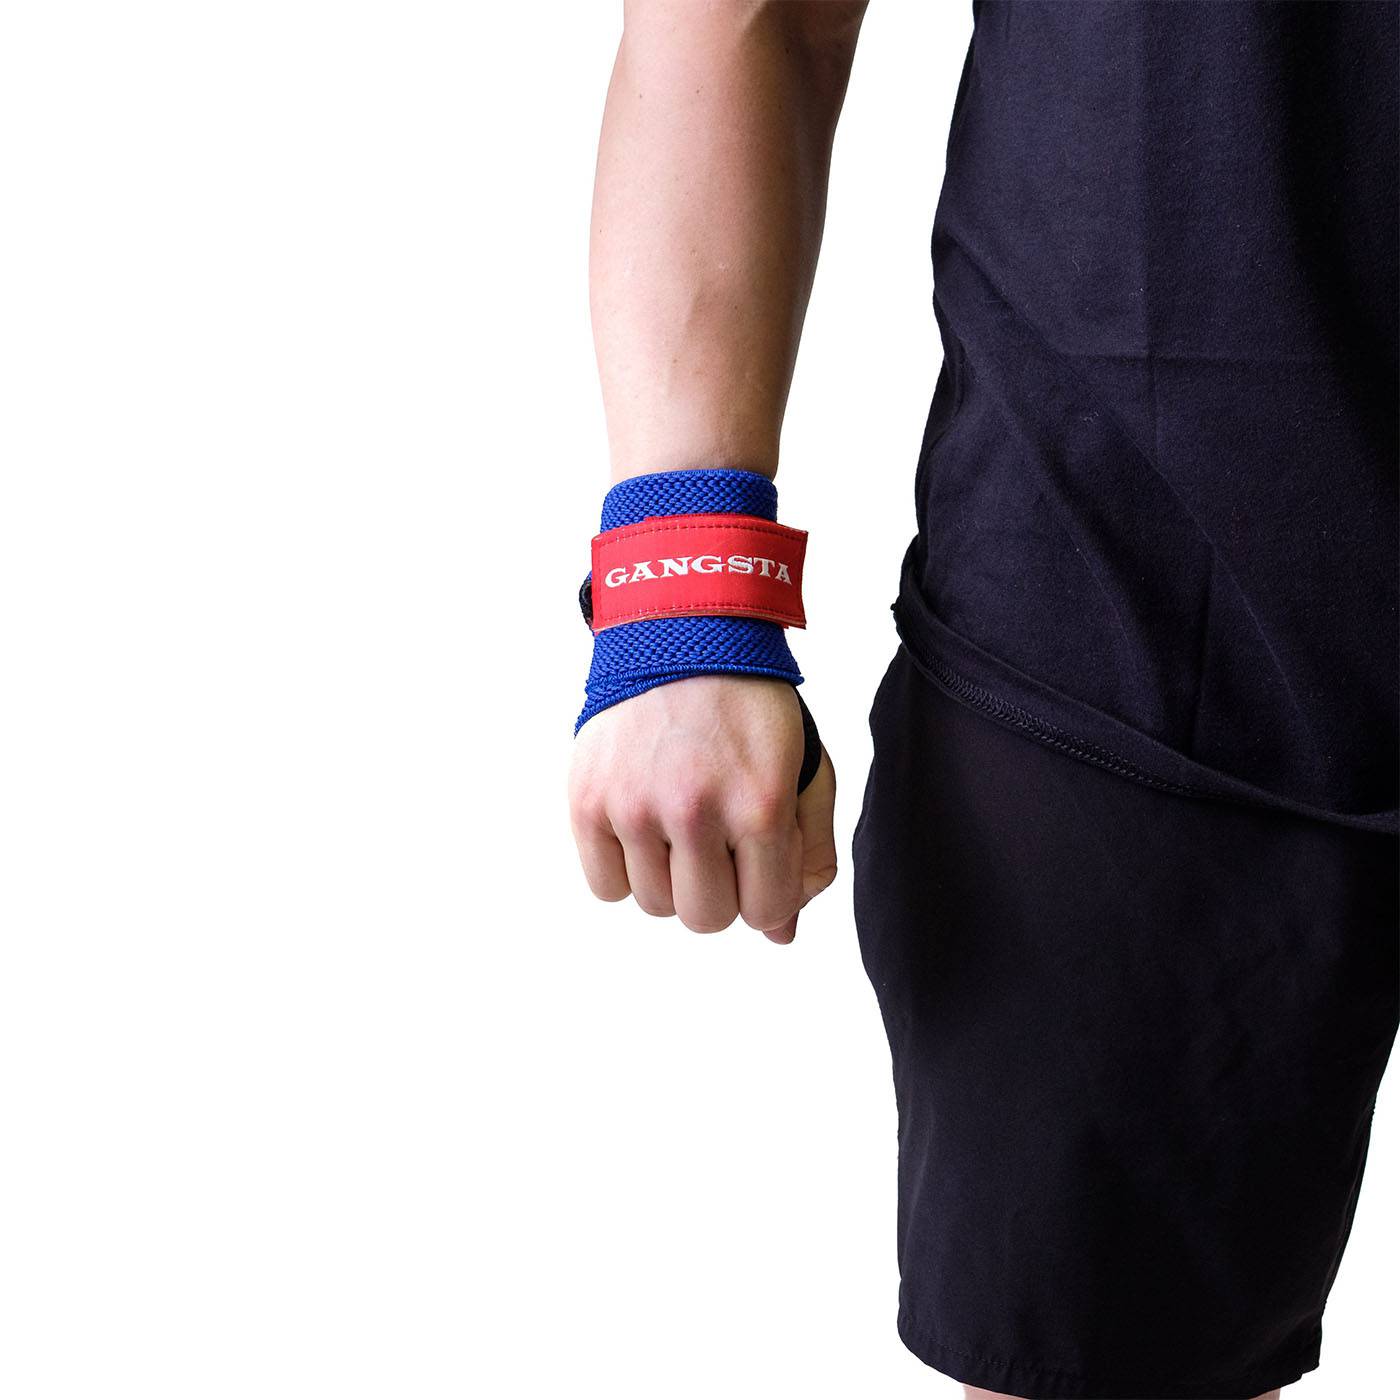 Sling Shot | Gangsta Wraps - XTC Fitness - Exercise Equipment Superstore - Canada - Wrist Wraps